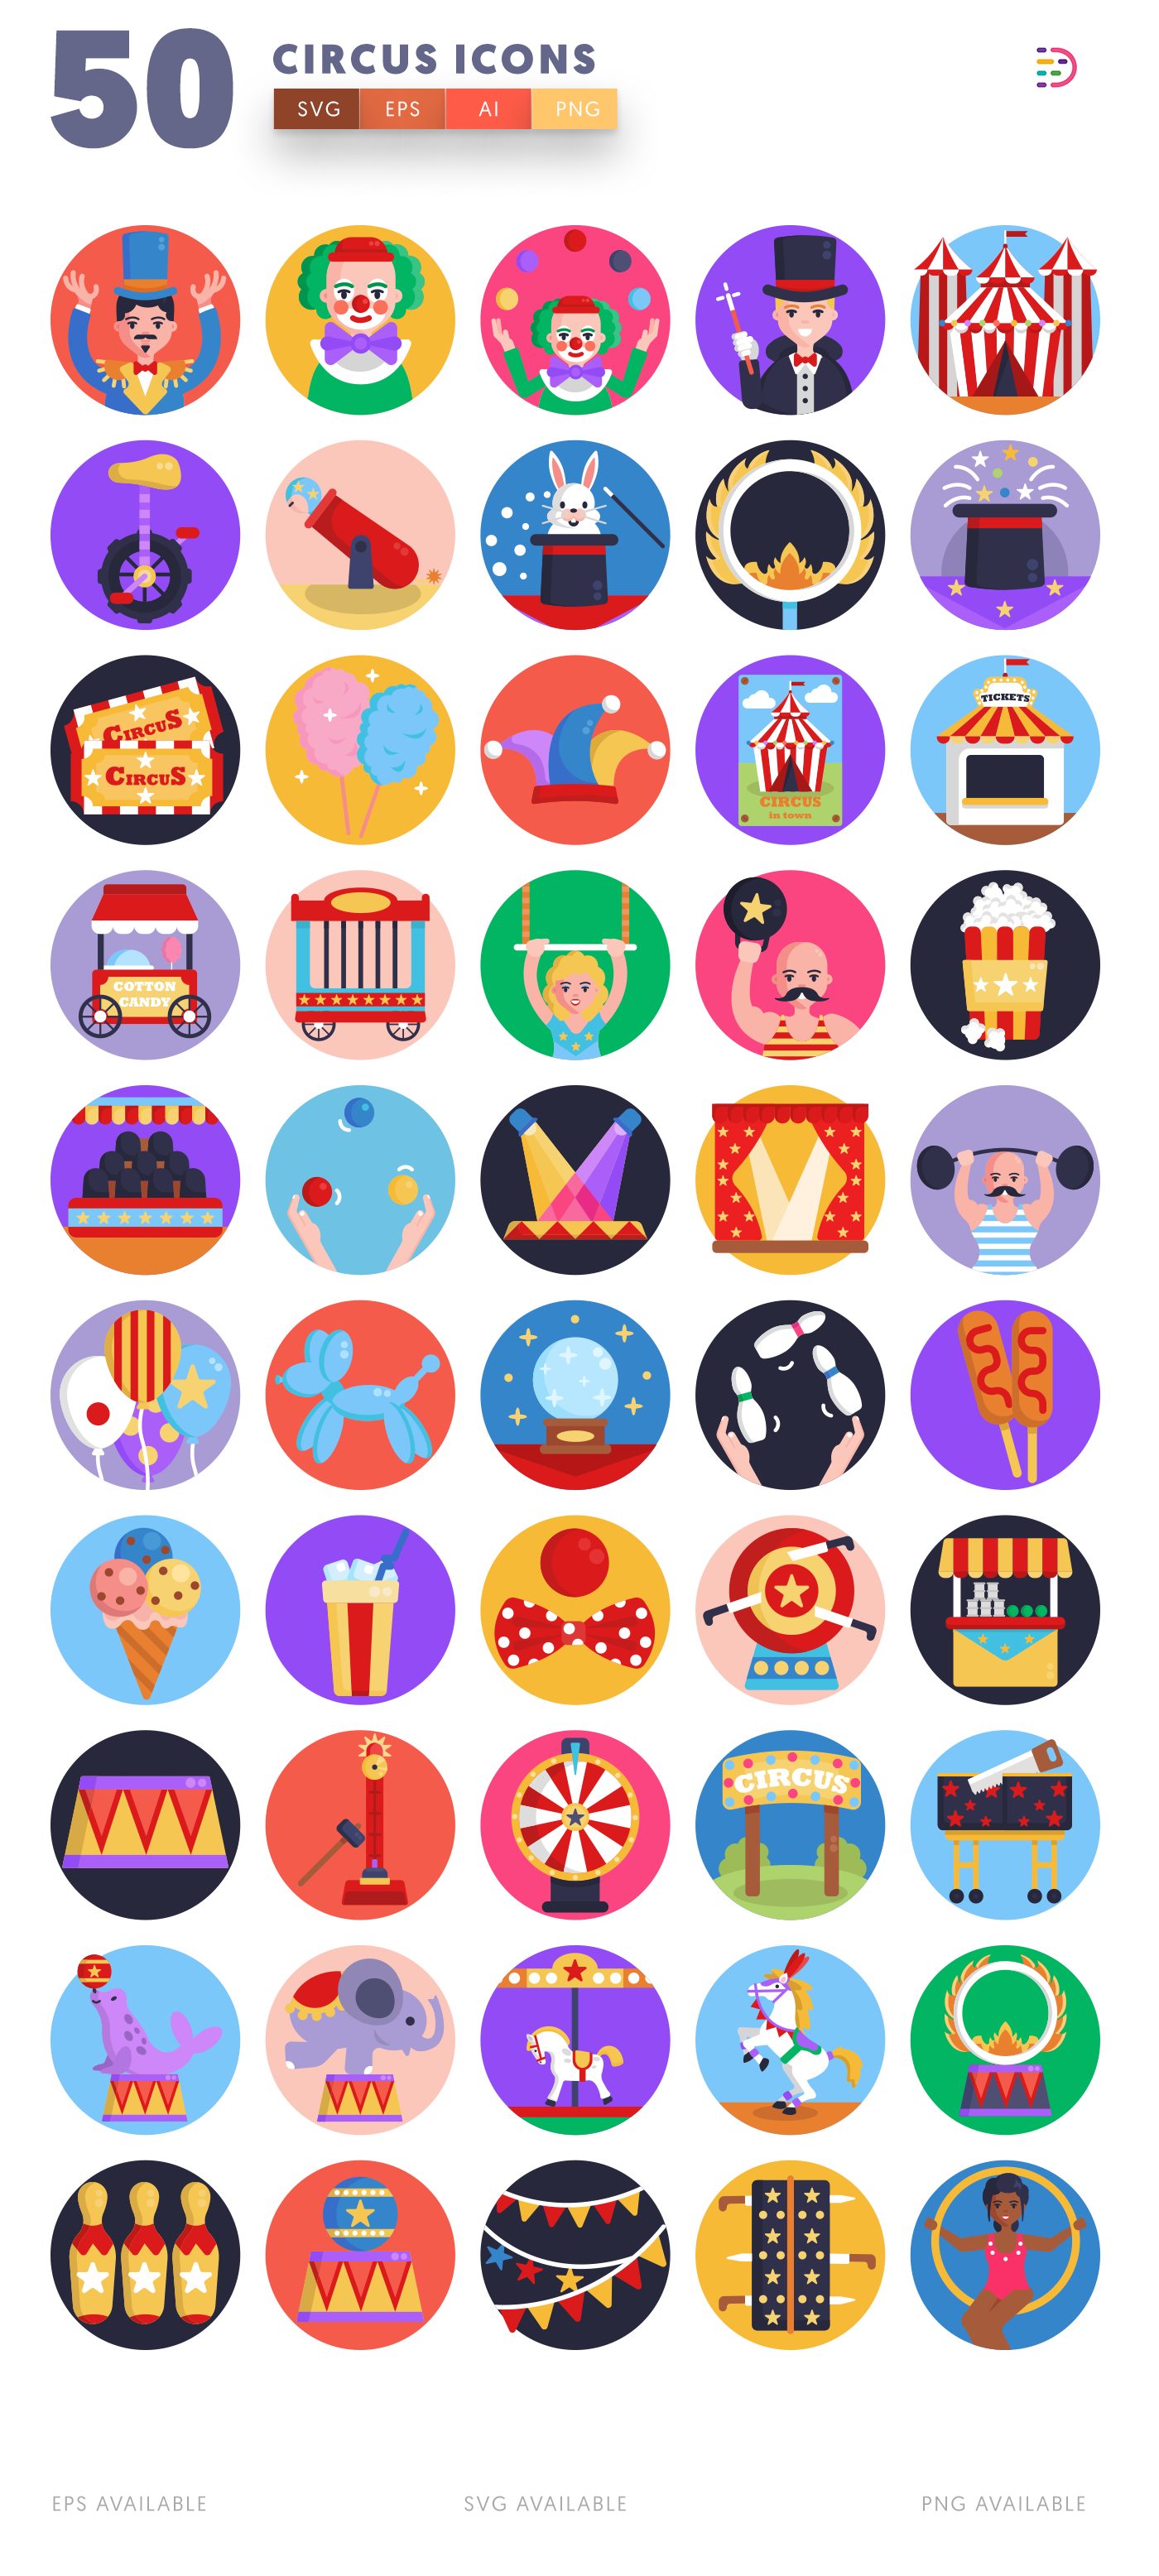 Circus icon pack